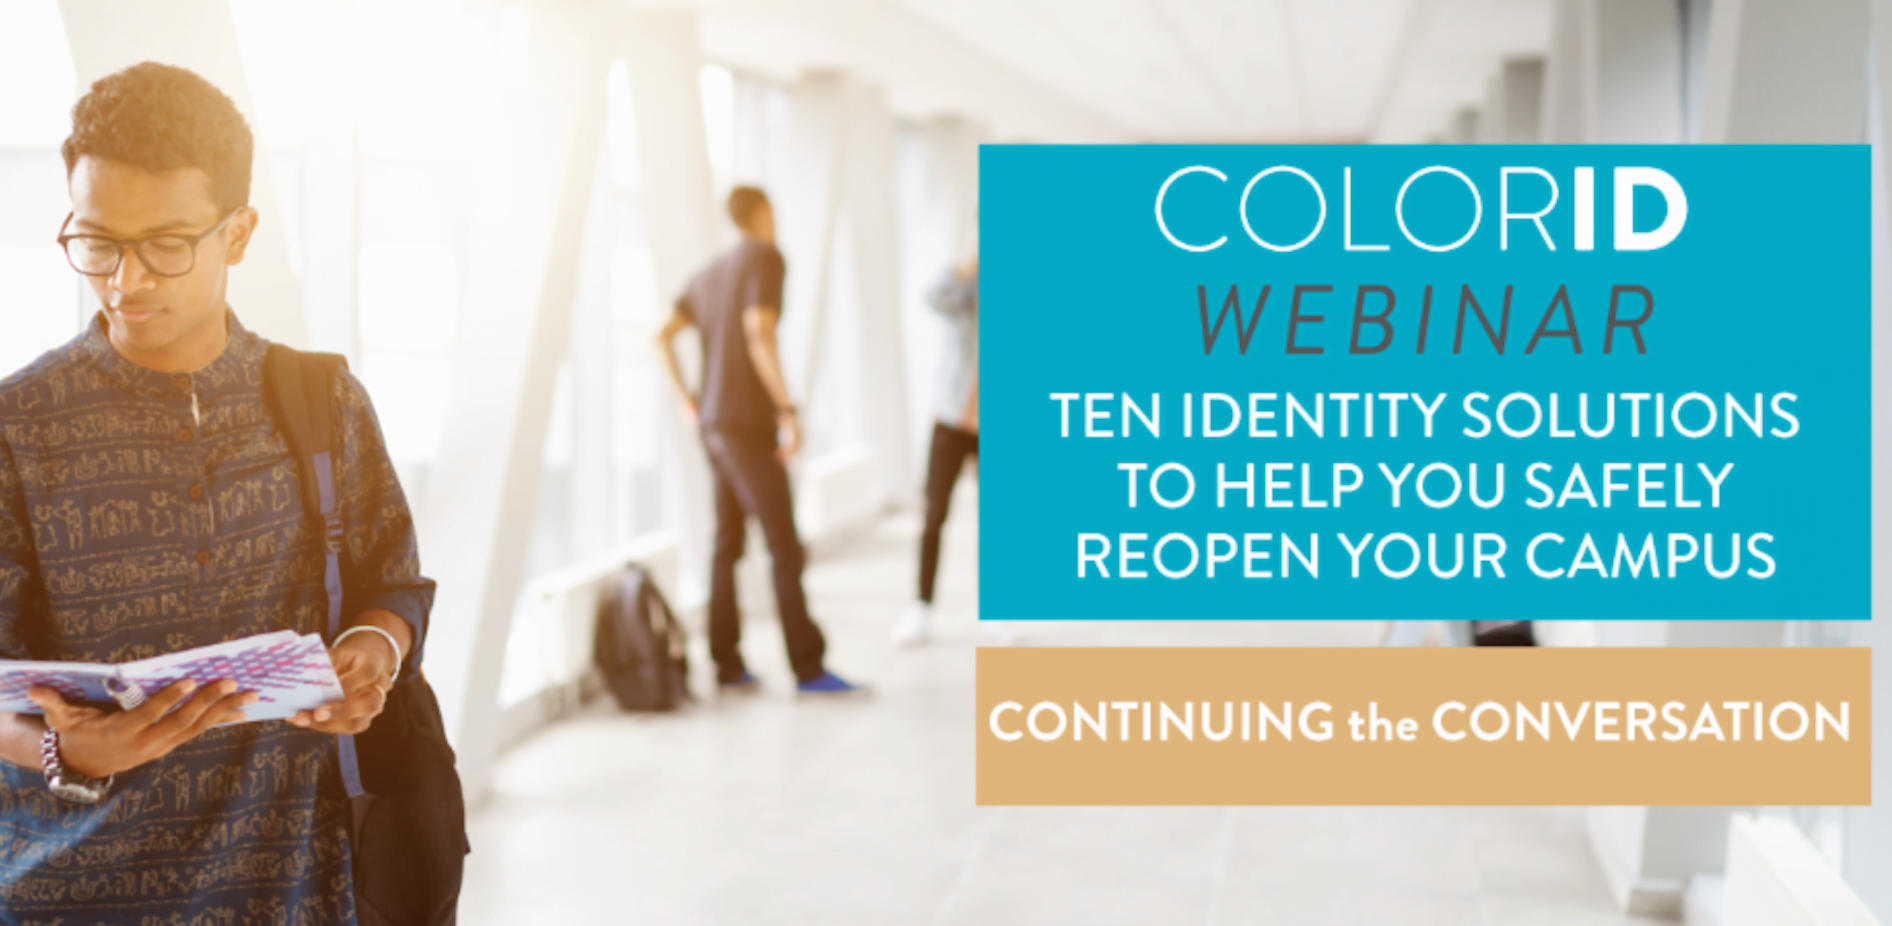 ColorID discusses solutions for safer campus return